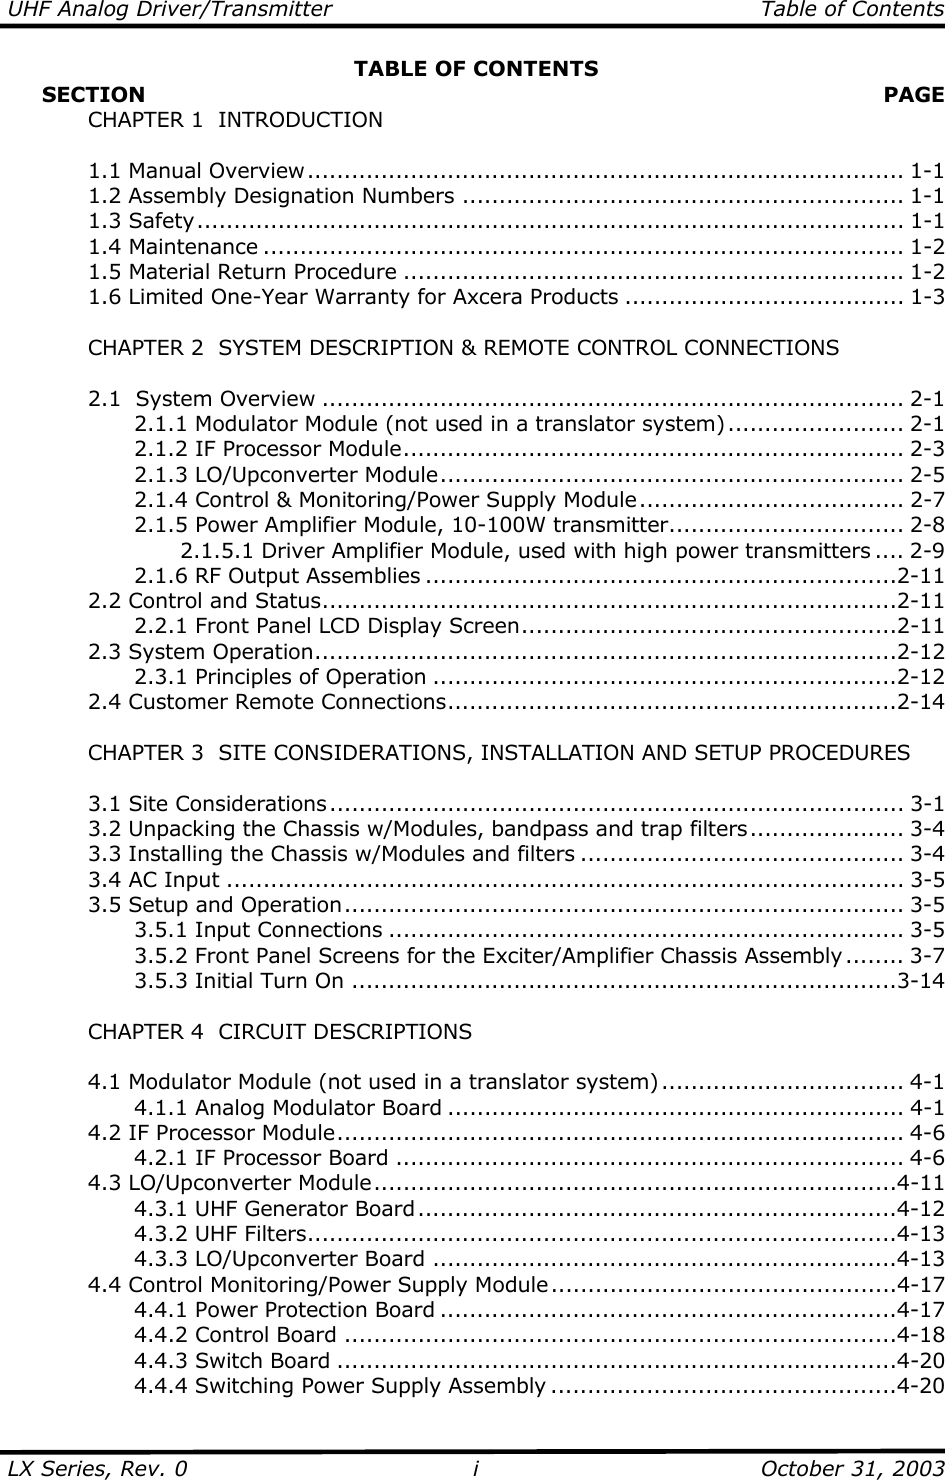 UHF Analog Driver/Transmitter   Table of Contents  LX Series, Rev. 0    October 31, 2003 iTABLE OF CONTENTS      SECTION   PAGE   CHAPTER 1  INTRODUCTION   1.1 Manual Overview................................................................................. 1-1   1.2 Assembly Designation Numbers ............................................................ 1-1  1.3 Safety................................................................................................ 1-1  1.4 Maintenance ....................................................................................... 1-2   1.5 Material Return Procedure .................................................................... 1-2   1.6 Limited One-Year Warranty for Axcera Products ...................................... 1-3    CHAPTER 2  SYSTEM DESCRIPTION &amp; REMOTE CONTROL CONNECTIONS    2.1  System Overview ............................................................................... 2-1     2.1.1 Modulator Module (not used in a translator system) ........................ 2-1     2.1.2 IF Processor Module.................................................................... 2-3   2.1.3 LO/Upconverter Module............................................................... 2-5     2.1.4 Control &amp; Monitoring/Power Supply Module.................................... 2-7     2.1.5 Power Amplifier Module, 10-100W transmitter................................ 2-8       2.1.5.1 Driver Amplifier Module, used with high power transmitters .... 2-9     2.1.6 RF Output Assemblies ................................................................2-11  2.2 Control and Status..............................................................................2-11     2.2.1 Front Panel LCD Display Screen...................................................2-11  2.3 System Operation...............................................................................2-12   2.3.1 Principles of Operation ...............................................................2-12  2.4 Customer Remote Connections.............................................................2-14      CHAPTER 3  SITE CONSIDERATIONS, INSTALLATION AND SETUP PROCEDURES     3.1 Site Considerations.............................................................................. 3-1   3.2 Unpacking the Chassis w/Modules, bandpass and trap filters..................... 3-4   3.3 Installing the Chassis w/Modules and filters ............................................ 3-4   3.4 AC Input ............................................................................................ 3-5  3.5 Setup and Operation............................................................................ 3-5   3.5.1 Input Connections ...................................................................... 3-5     3.5.2 Front Panel Screens for the Exciter/Amplifier Chassis Assembly ........ 3-7   3.5.3 Initial Turn On ..........................................................................3-14    CHAPTER 4  CIRCUIT DESCRIPTIONS    4.1 Modulator Module (not used in a translator system)................................. 4-1     4.1.1 Analog Modulator Board .............................................................. 4-1   4.2 IF Processor Module............................................................................. 4-6     4.2.1 IF Processor Board ..................................................................... 4-6  4.3 LO/Upconverter Module.......................................................................4-11     4.3.1 UHF Generator Board.................................................................4-12   4.3.2 UHF Filters................................................................................4-13   4.3.3 LO/Upconverter Board ...............................................................4-13   4.4 Control Monitoring/Power Supply Module...............................................4-17     4.4.1 Power Protection Board ..............................................................4-17     4.4.2 Control Board ...........................................................................4-18   4.4.3 Switch Board ............................................................................4-20     4.4.4 Switching Power Supply Assembly ...............................................4-20 